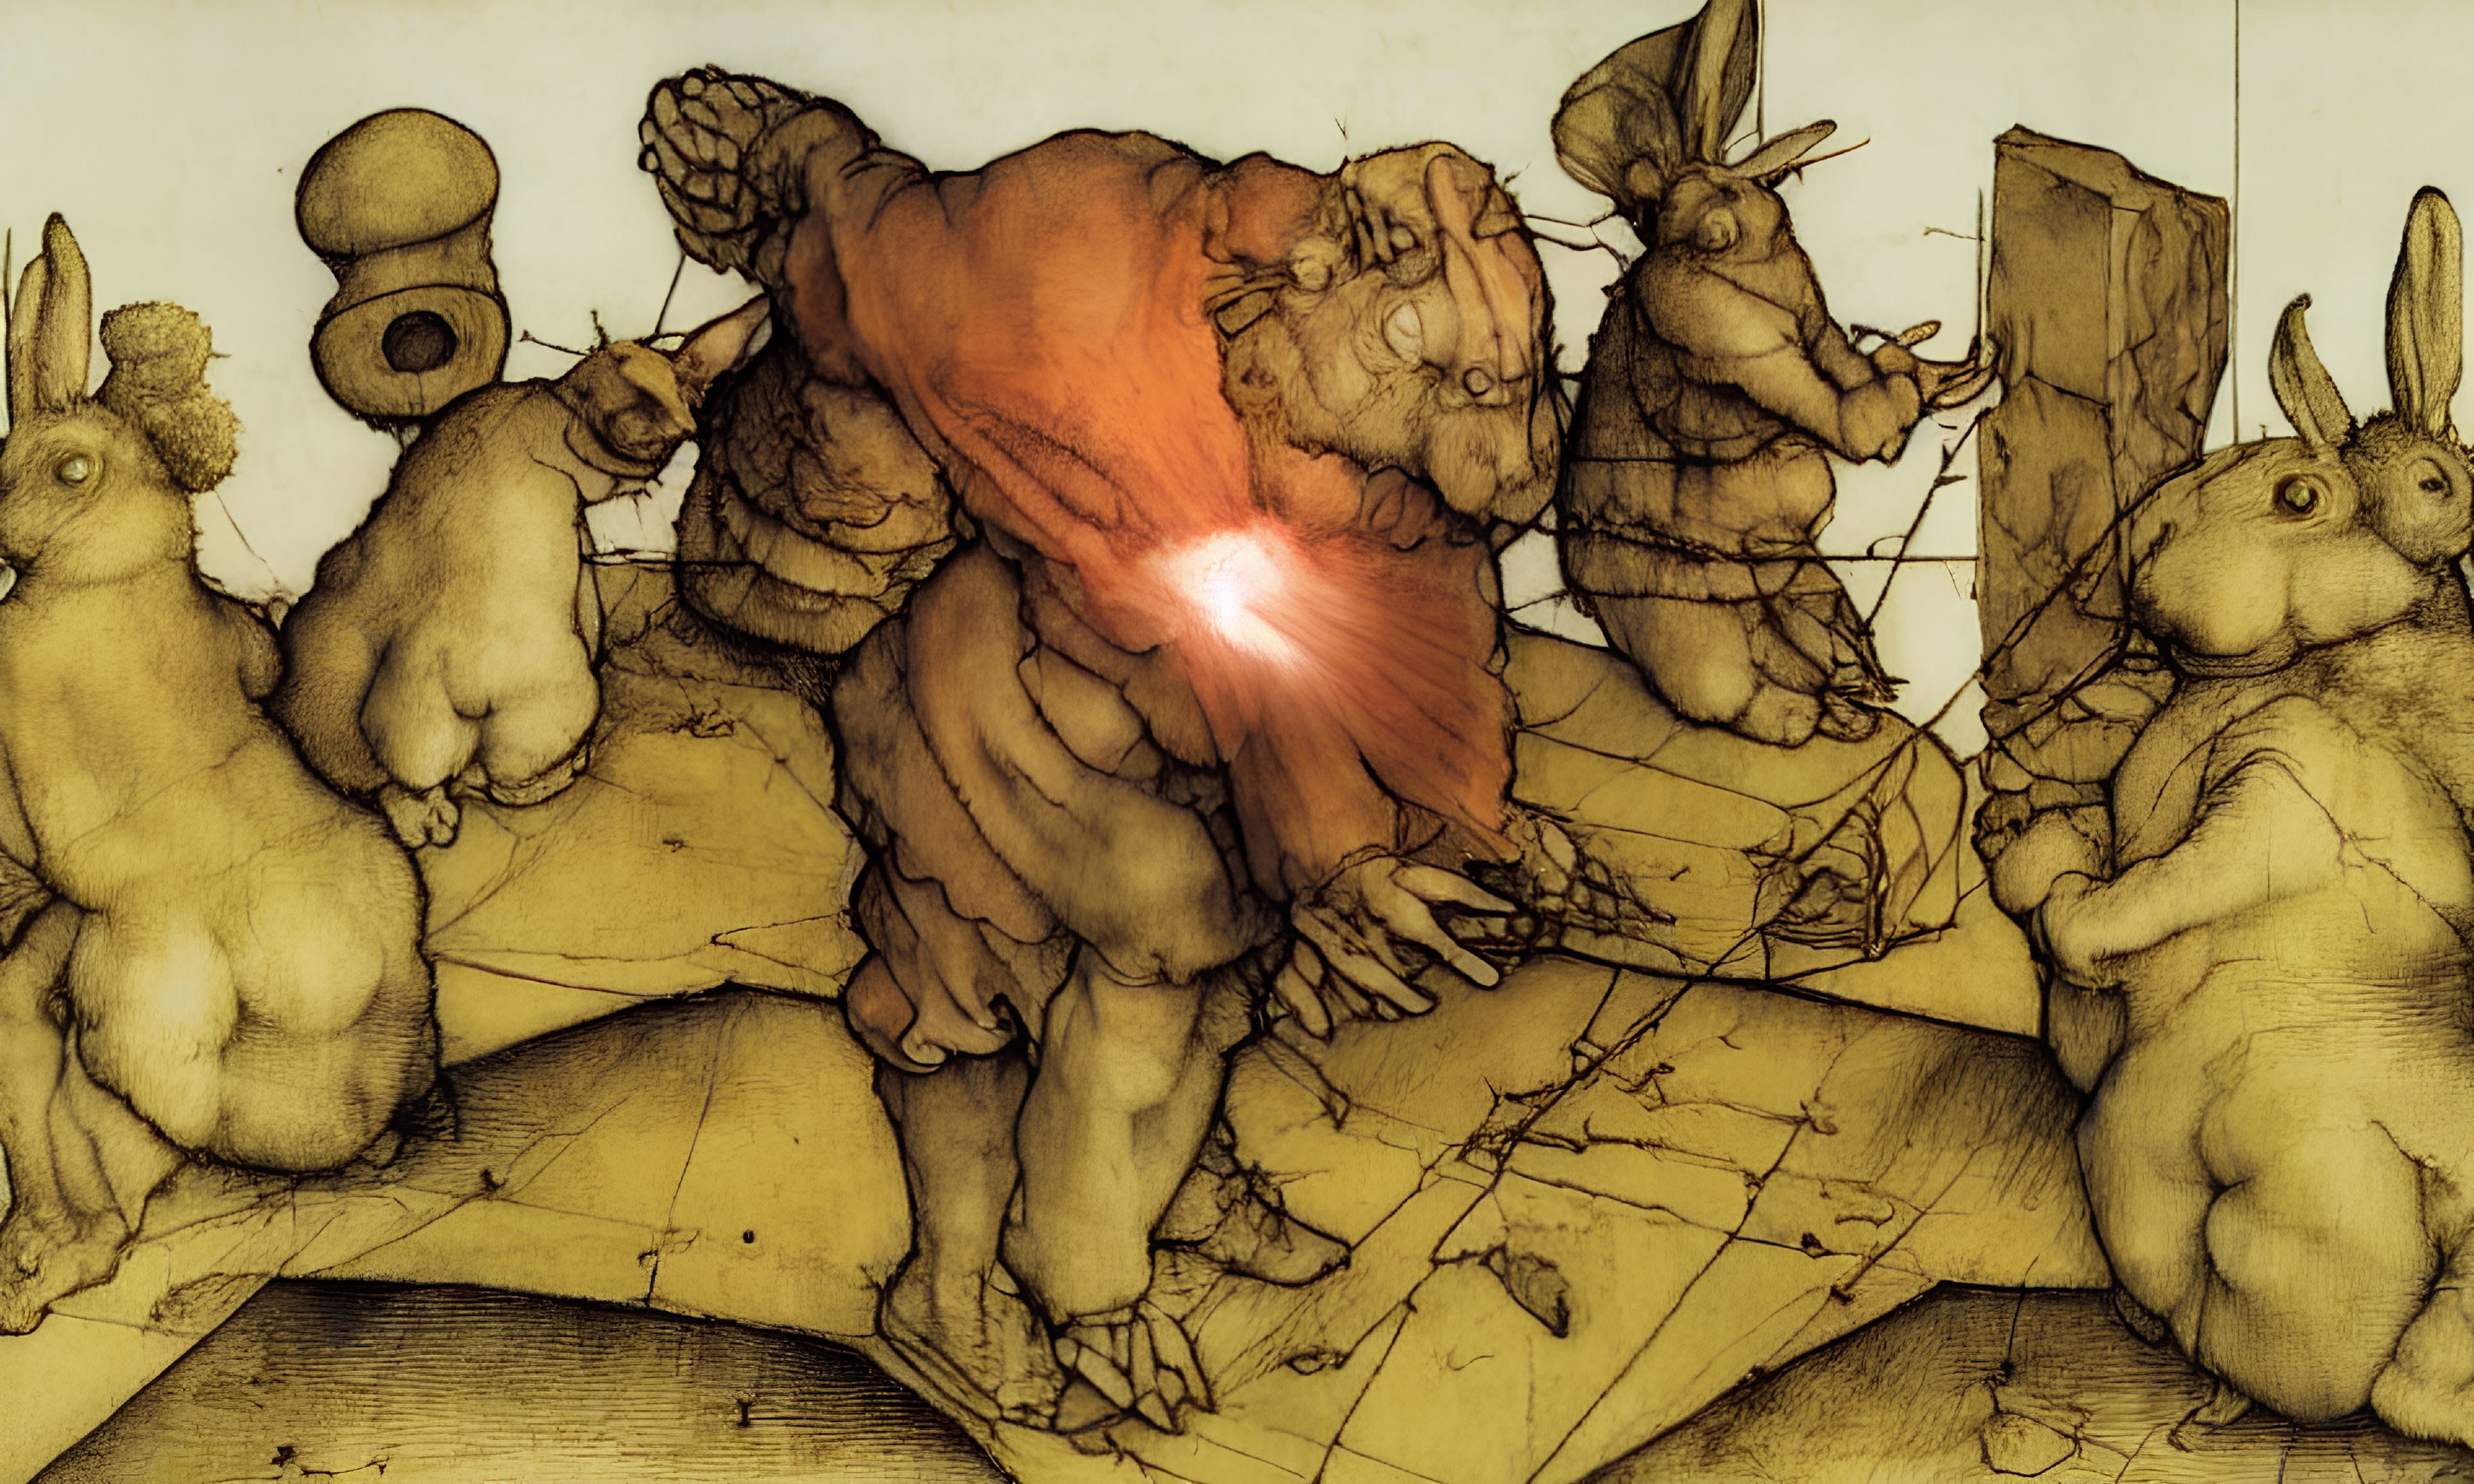 Fantastical anthropomorphic rabbit creatures studying a map with glowing figure